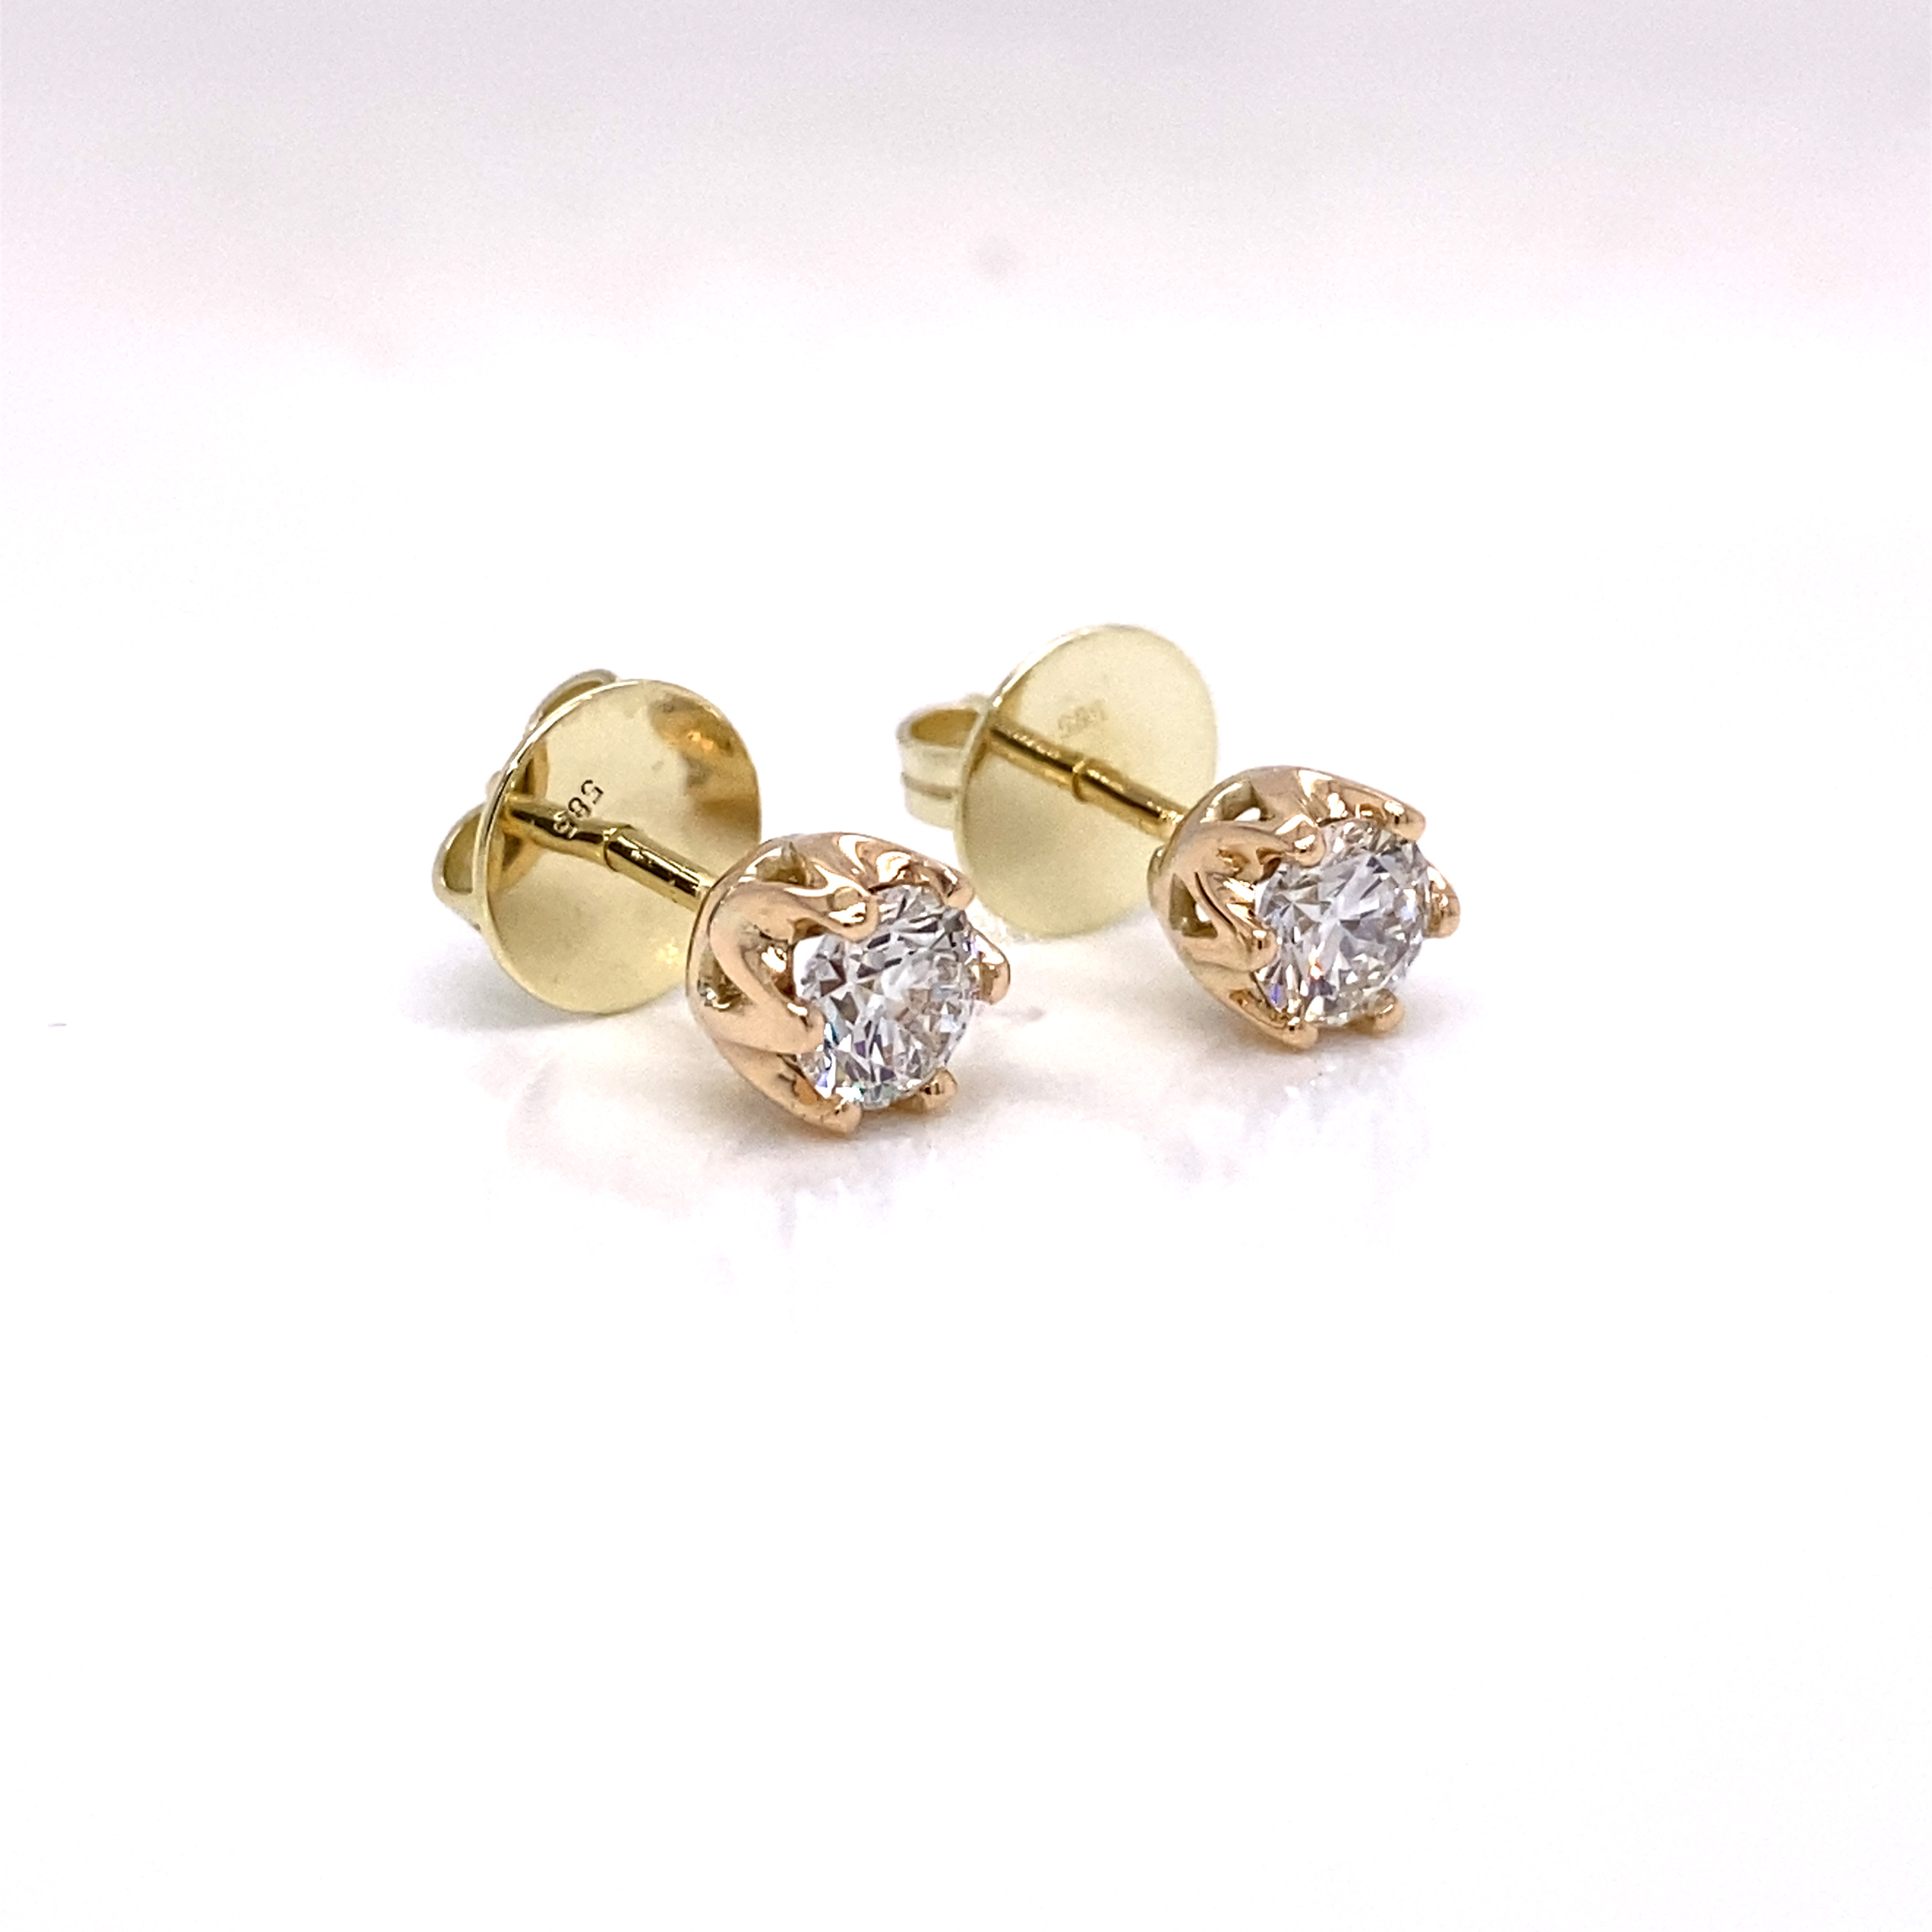 100% Handmade Solitaire Diamond Studs in Pink Gold - Total 1.00ct. -  0.50ct. River (D) - VVS2 & 0.50ct. River (D) VS2 - GIA Certified  
